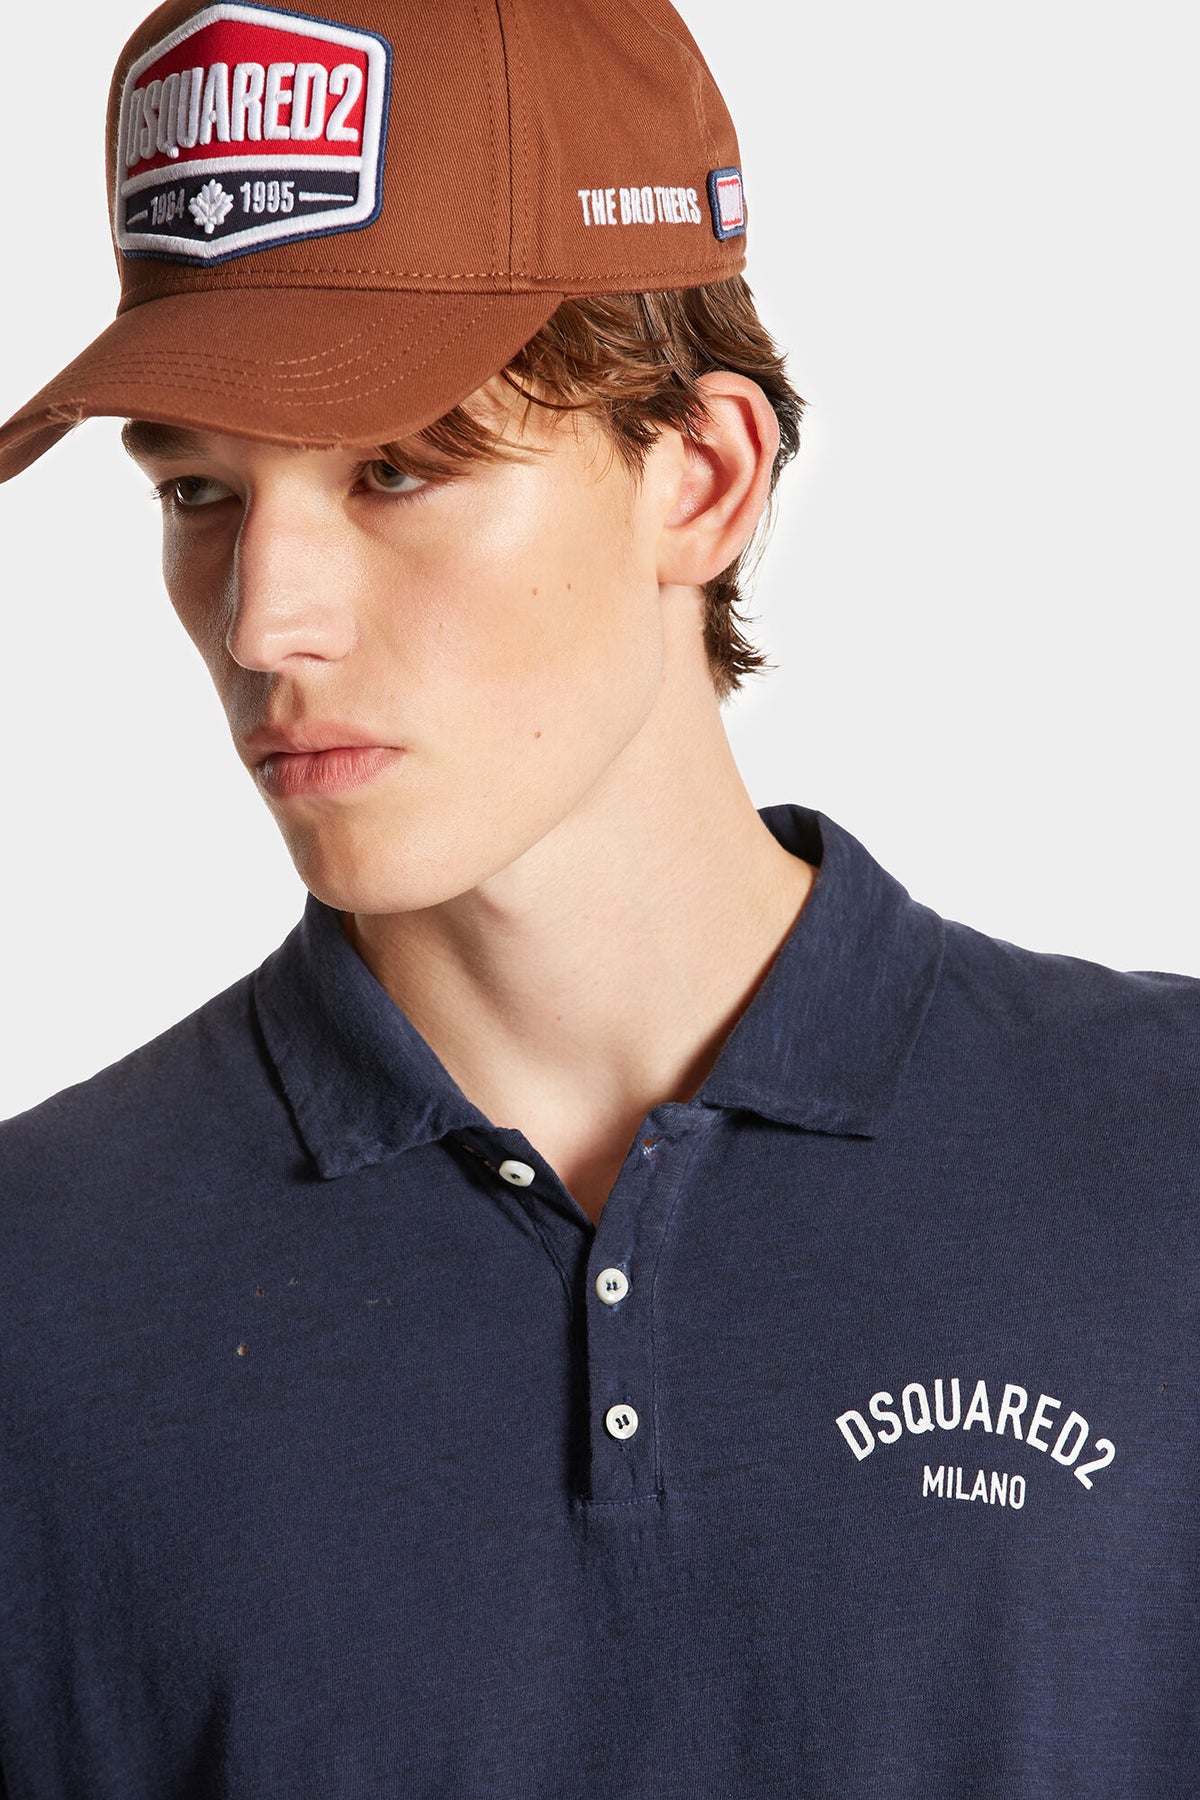 DSQUARED2 MILANO TENNIS FIT POLO SHIRT